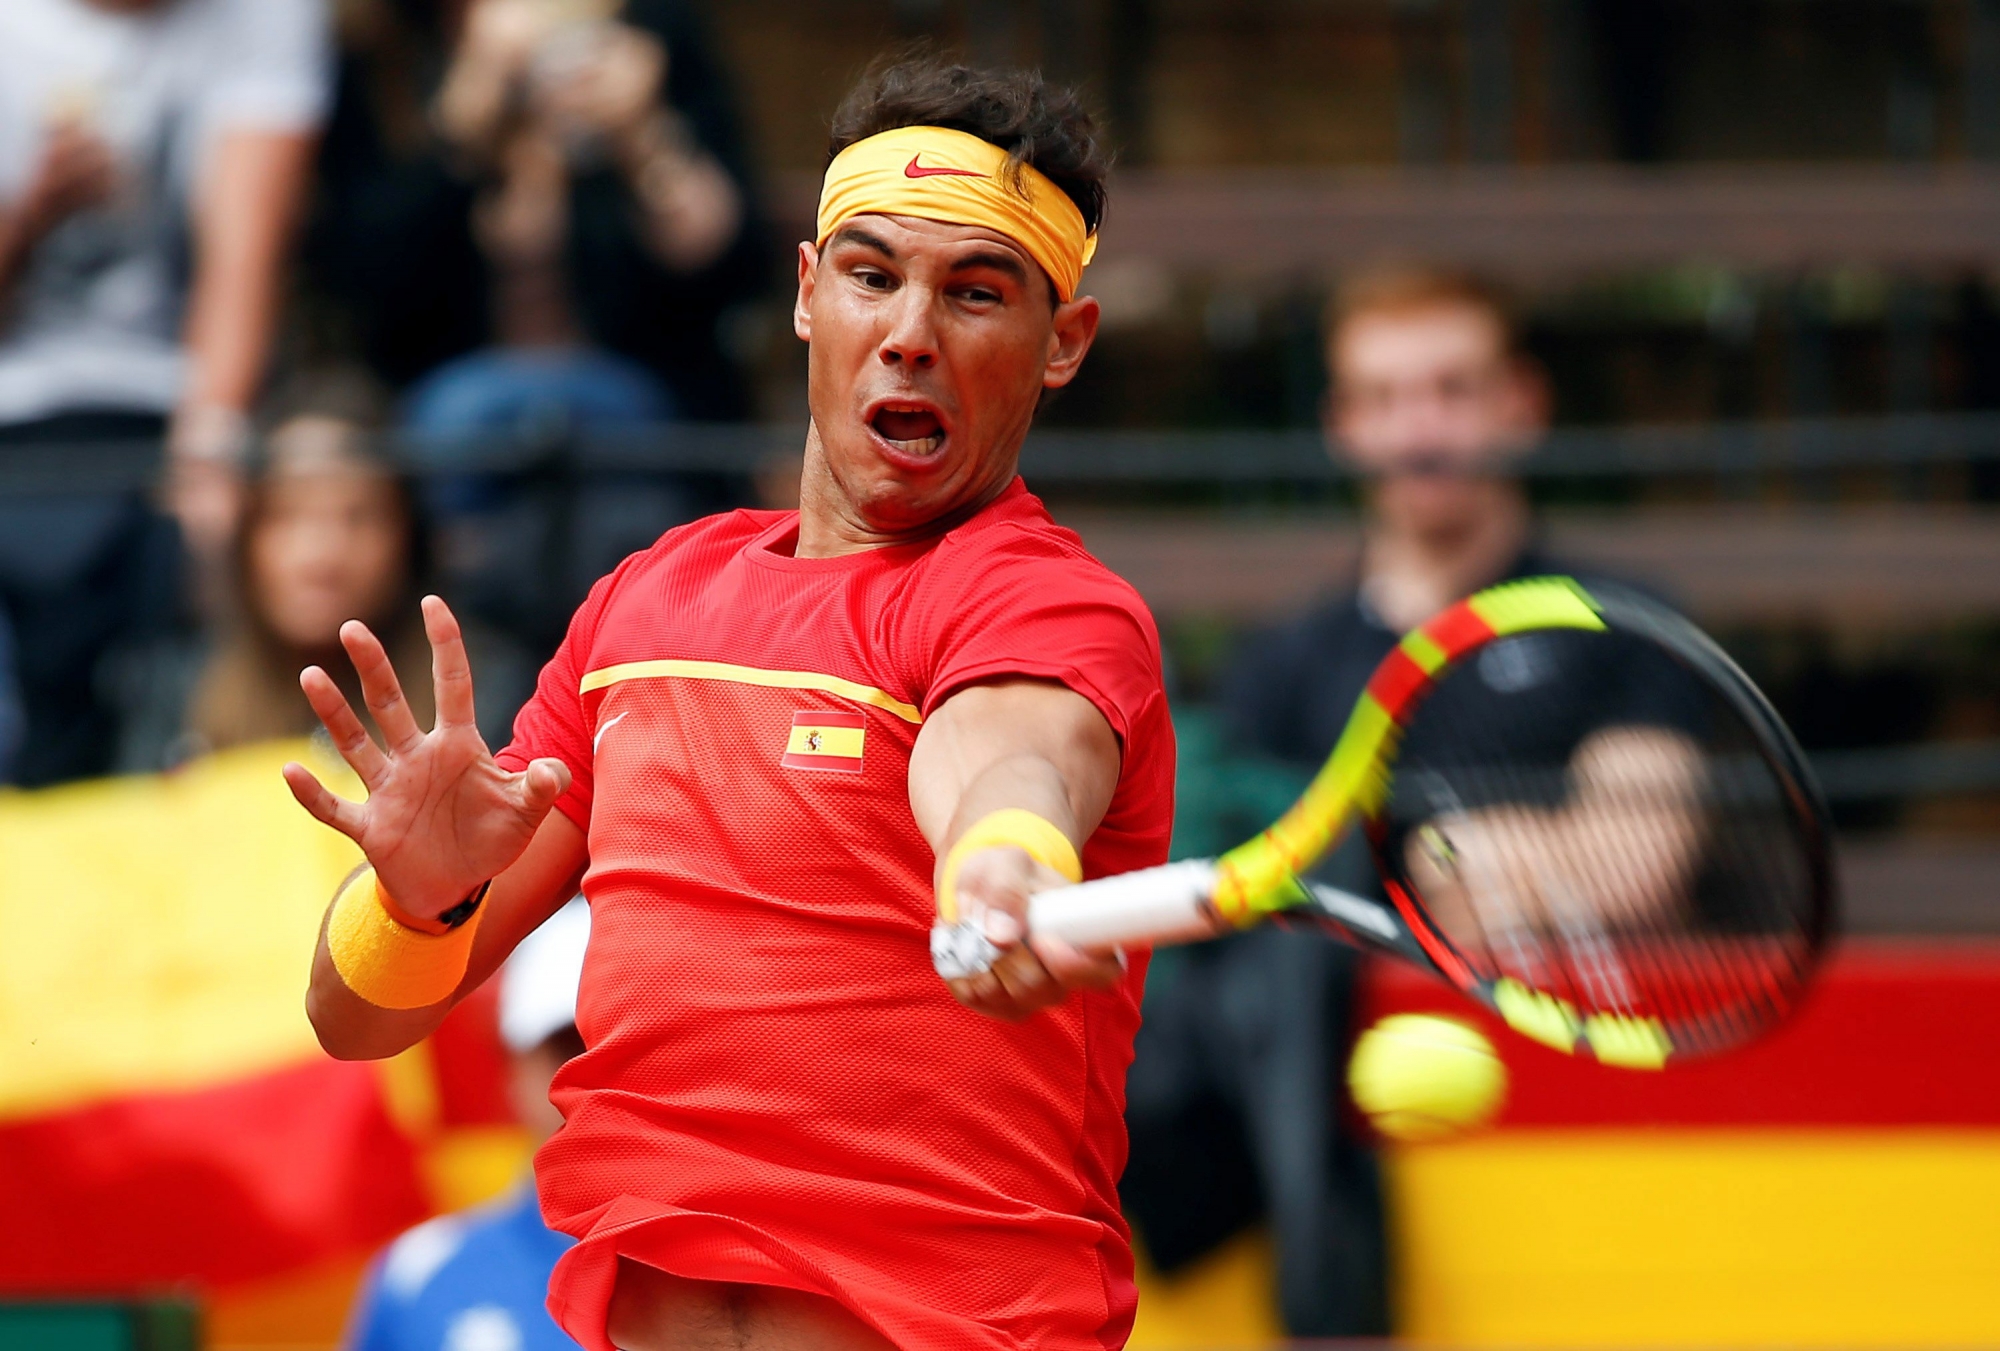 epa06649782 Spain's Rafael Nadal returns a ball to Germany's Philipp Kohlschreiber during their match of the Davis Cup playoffs between Spain and Germany at the Bullring in Valencia, Spain, 06 April 2018.  EPA/KAI FOERSTERLING SPAIN TENNIS DAVIS CUP